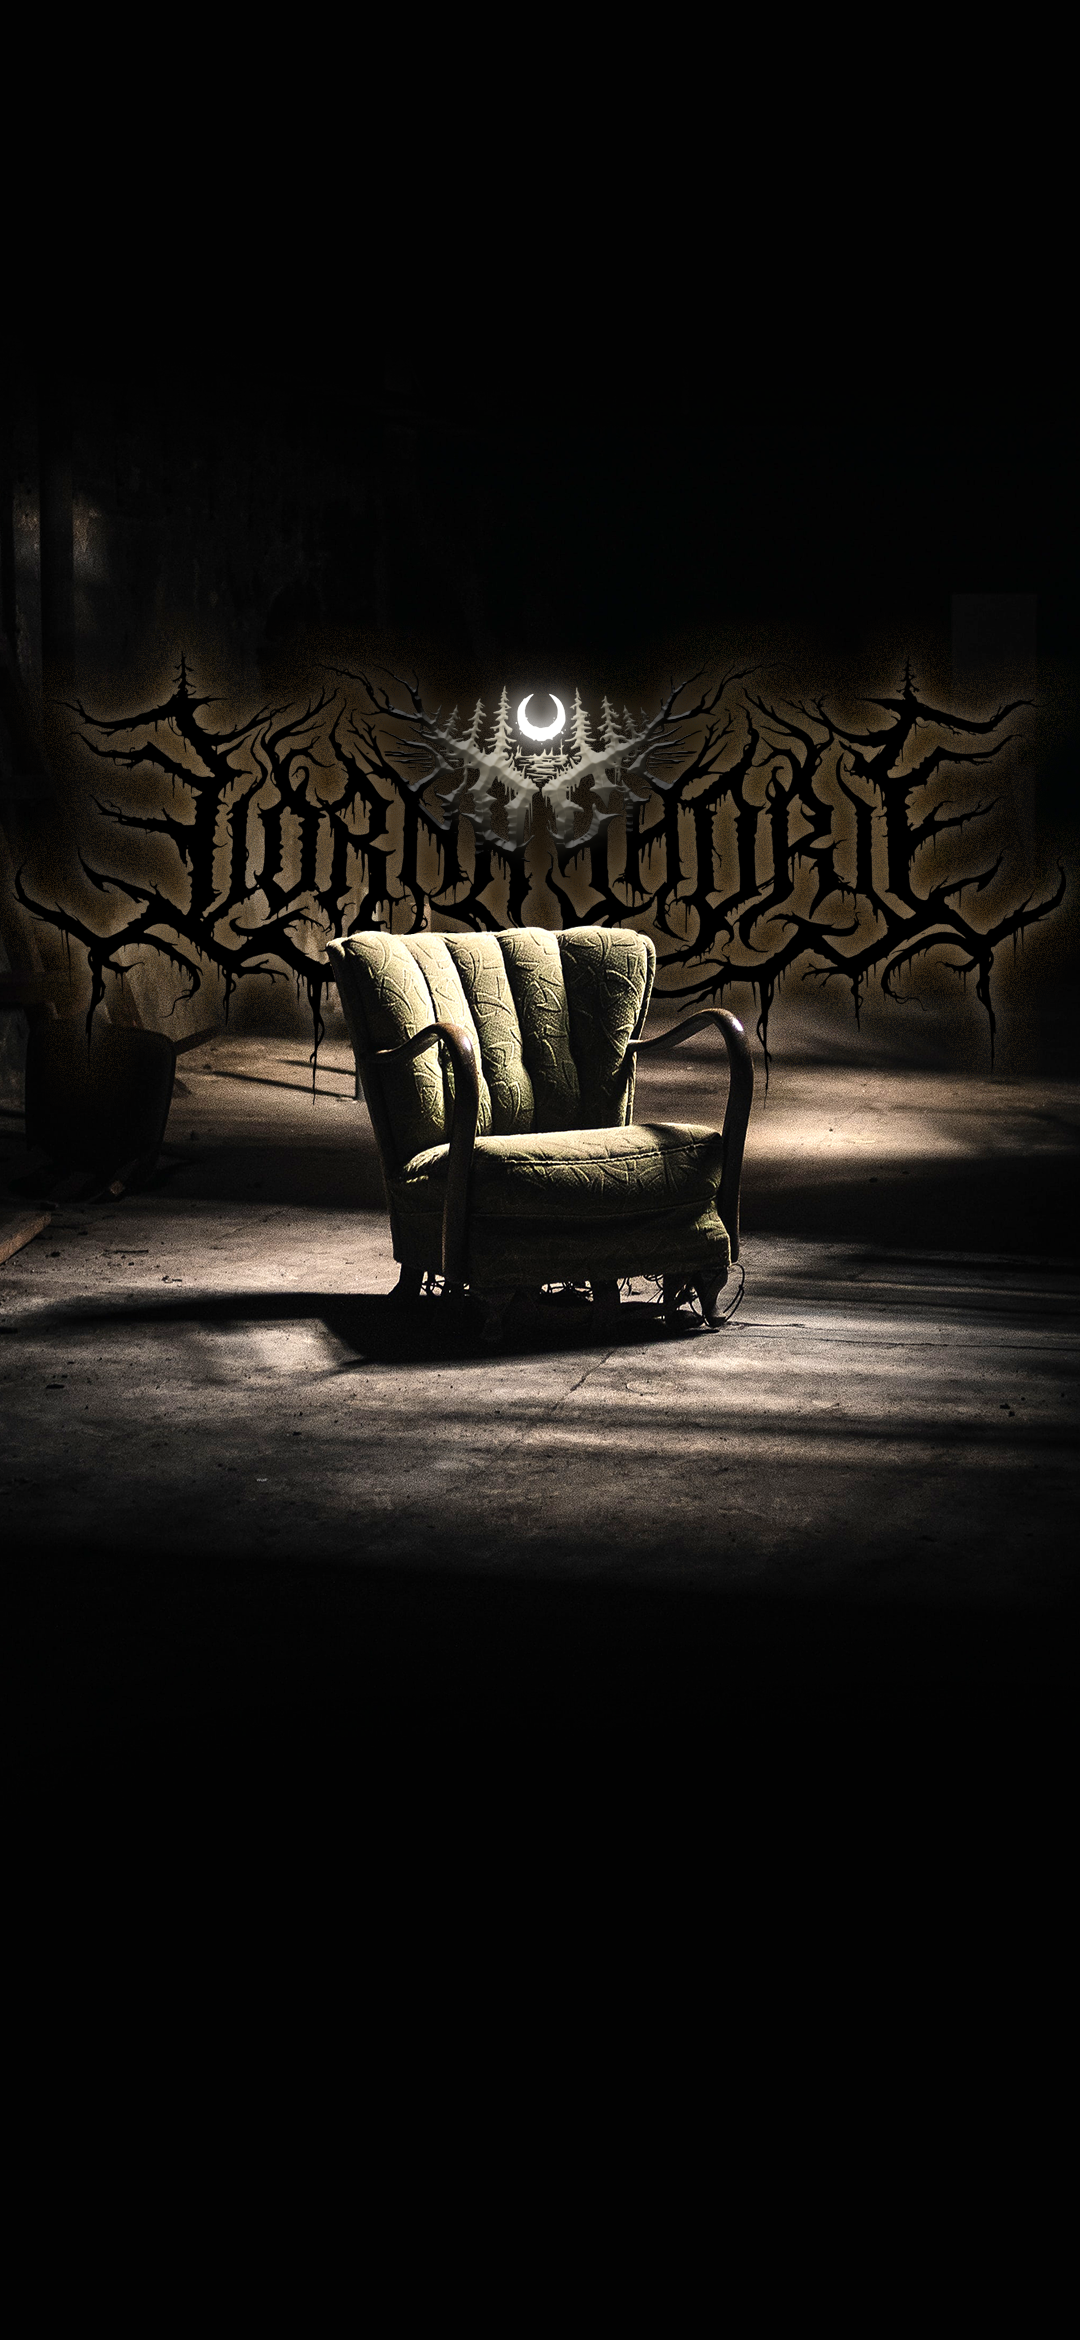 General 1080x2340 Lorna Shore deathcore abandoned chair